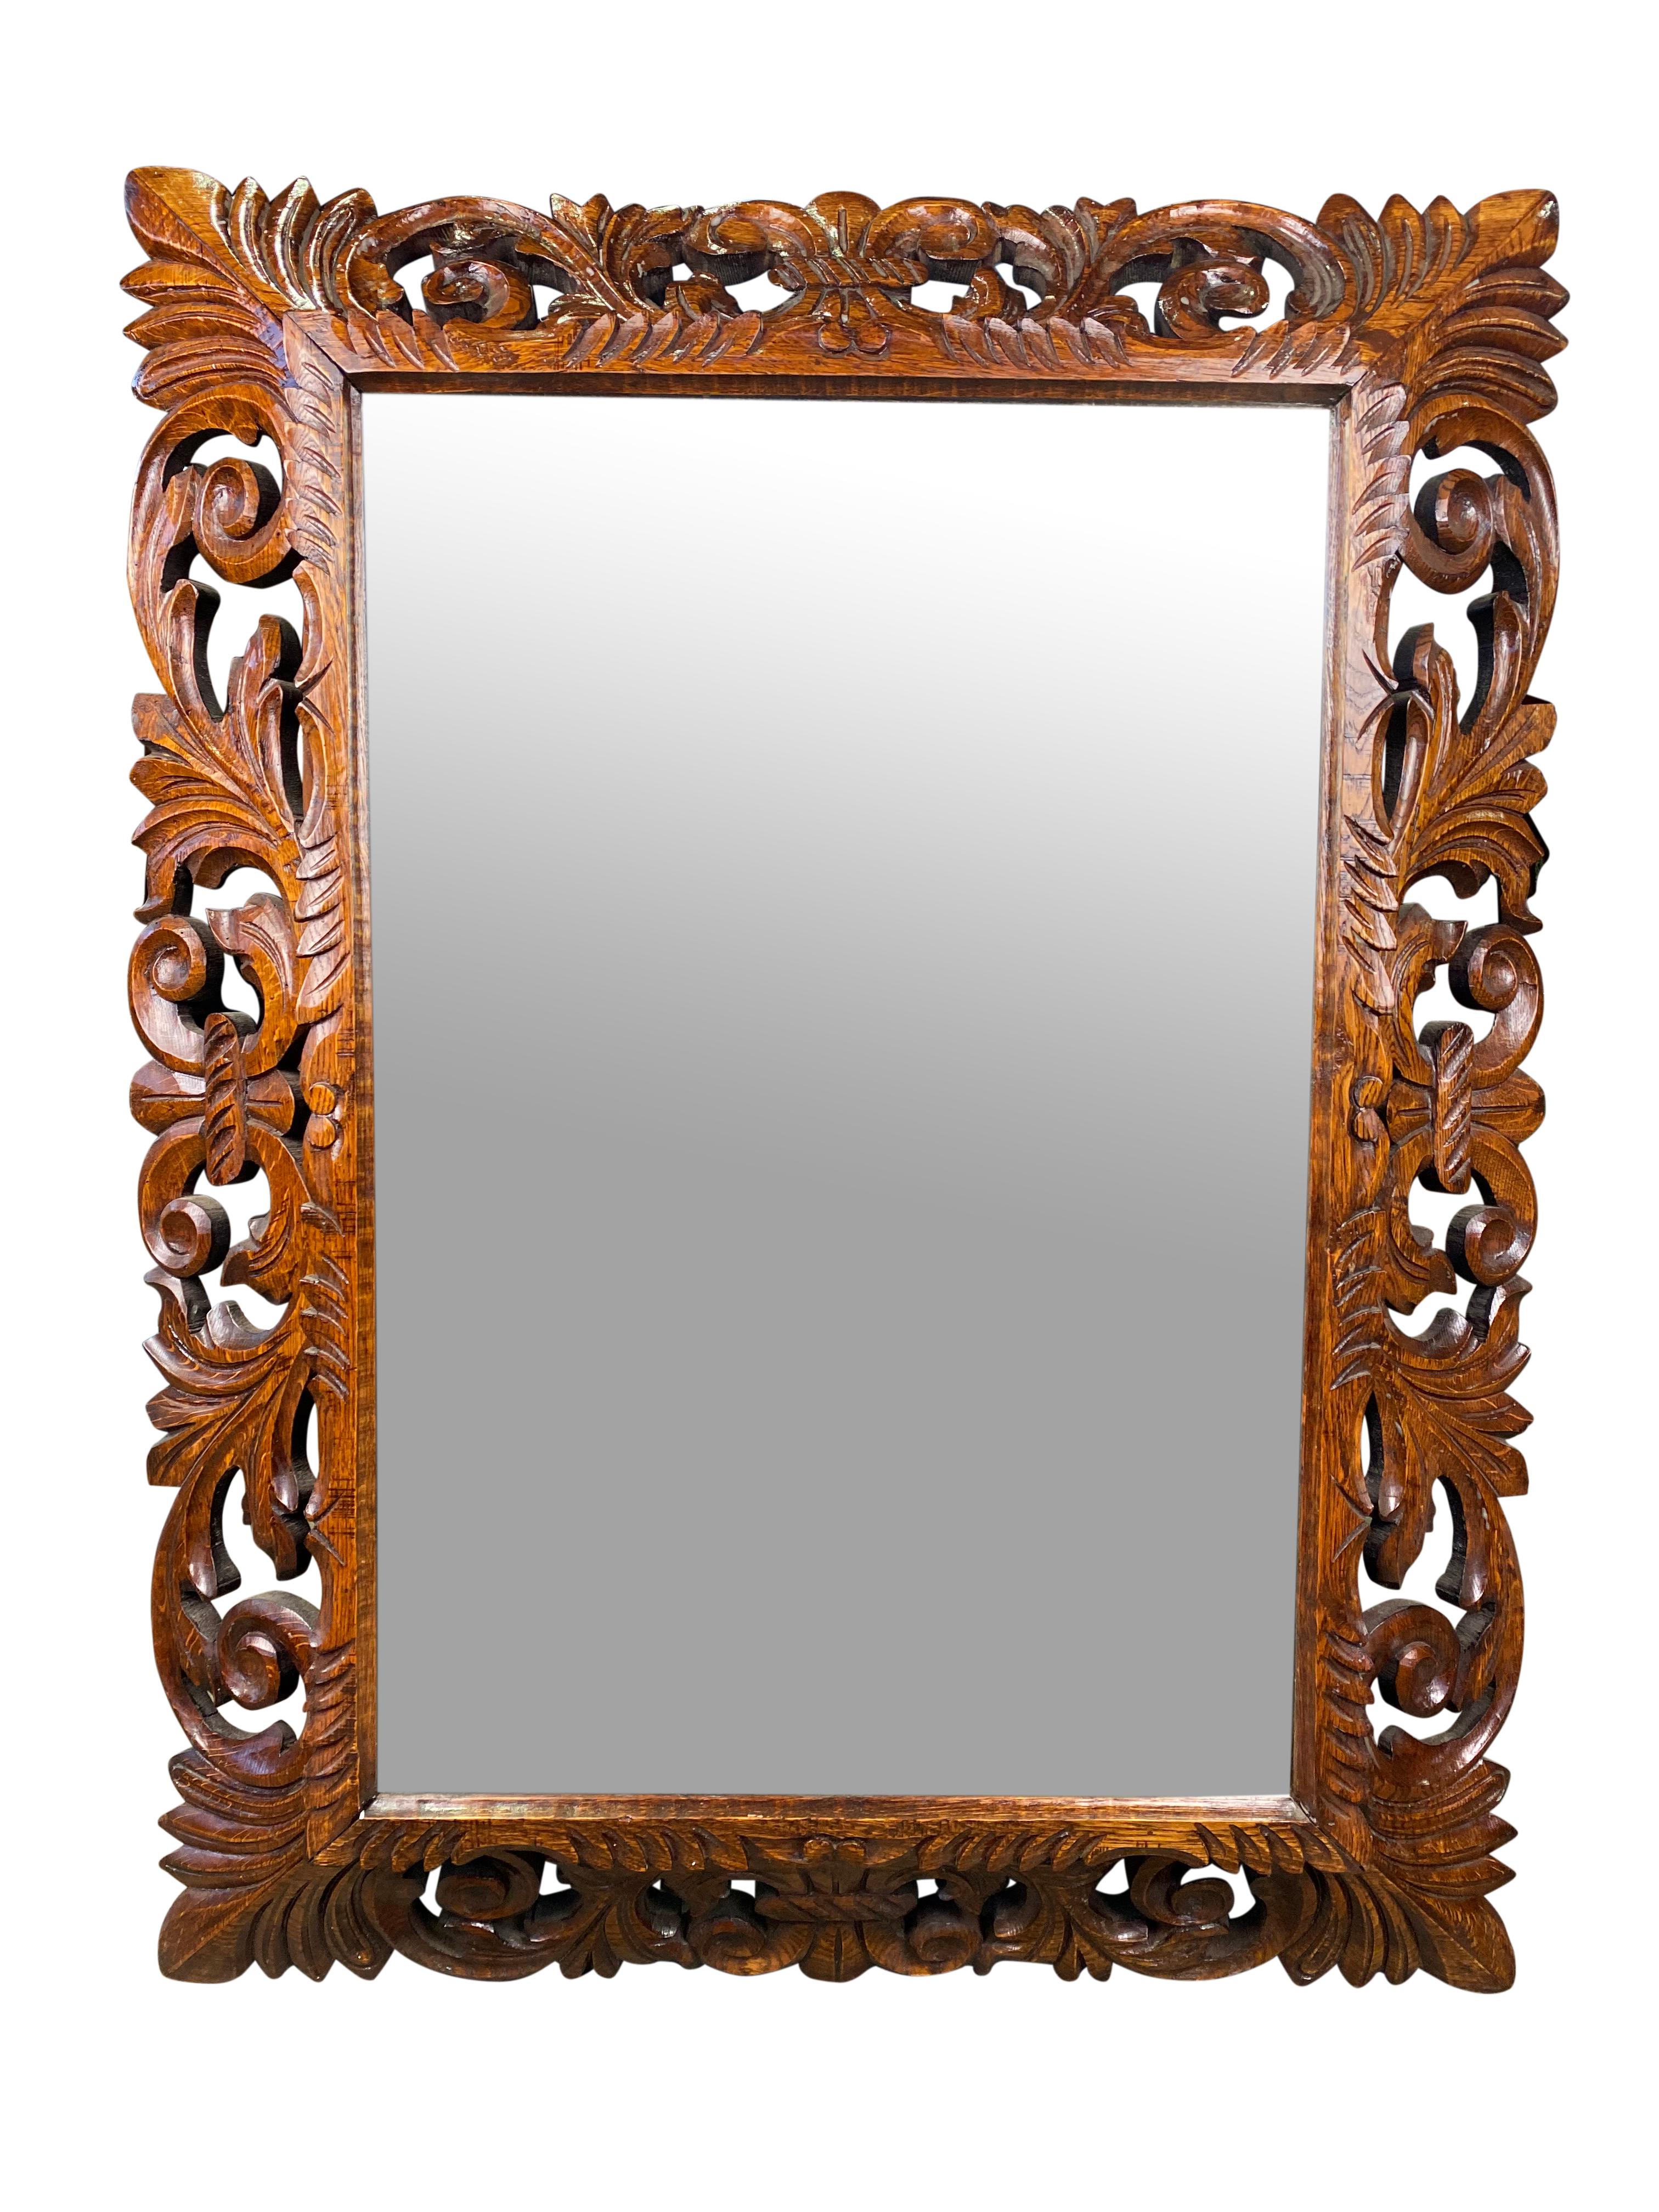 Extravagantly carved mahogany mirror in rectangular dimension. A lovely grain pattern runs symmetrically across the wood surrounding a very generously sized fitted mirror. 

Dimensions (cm)
107H/80W/79D